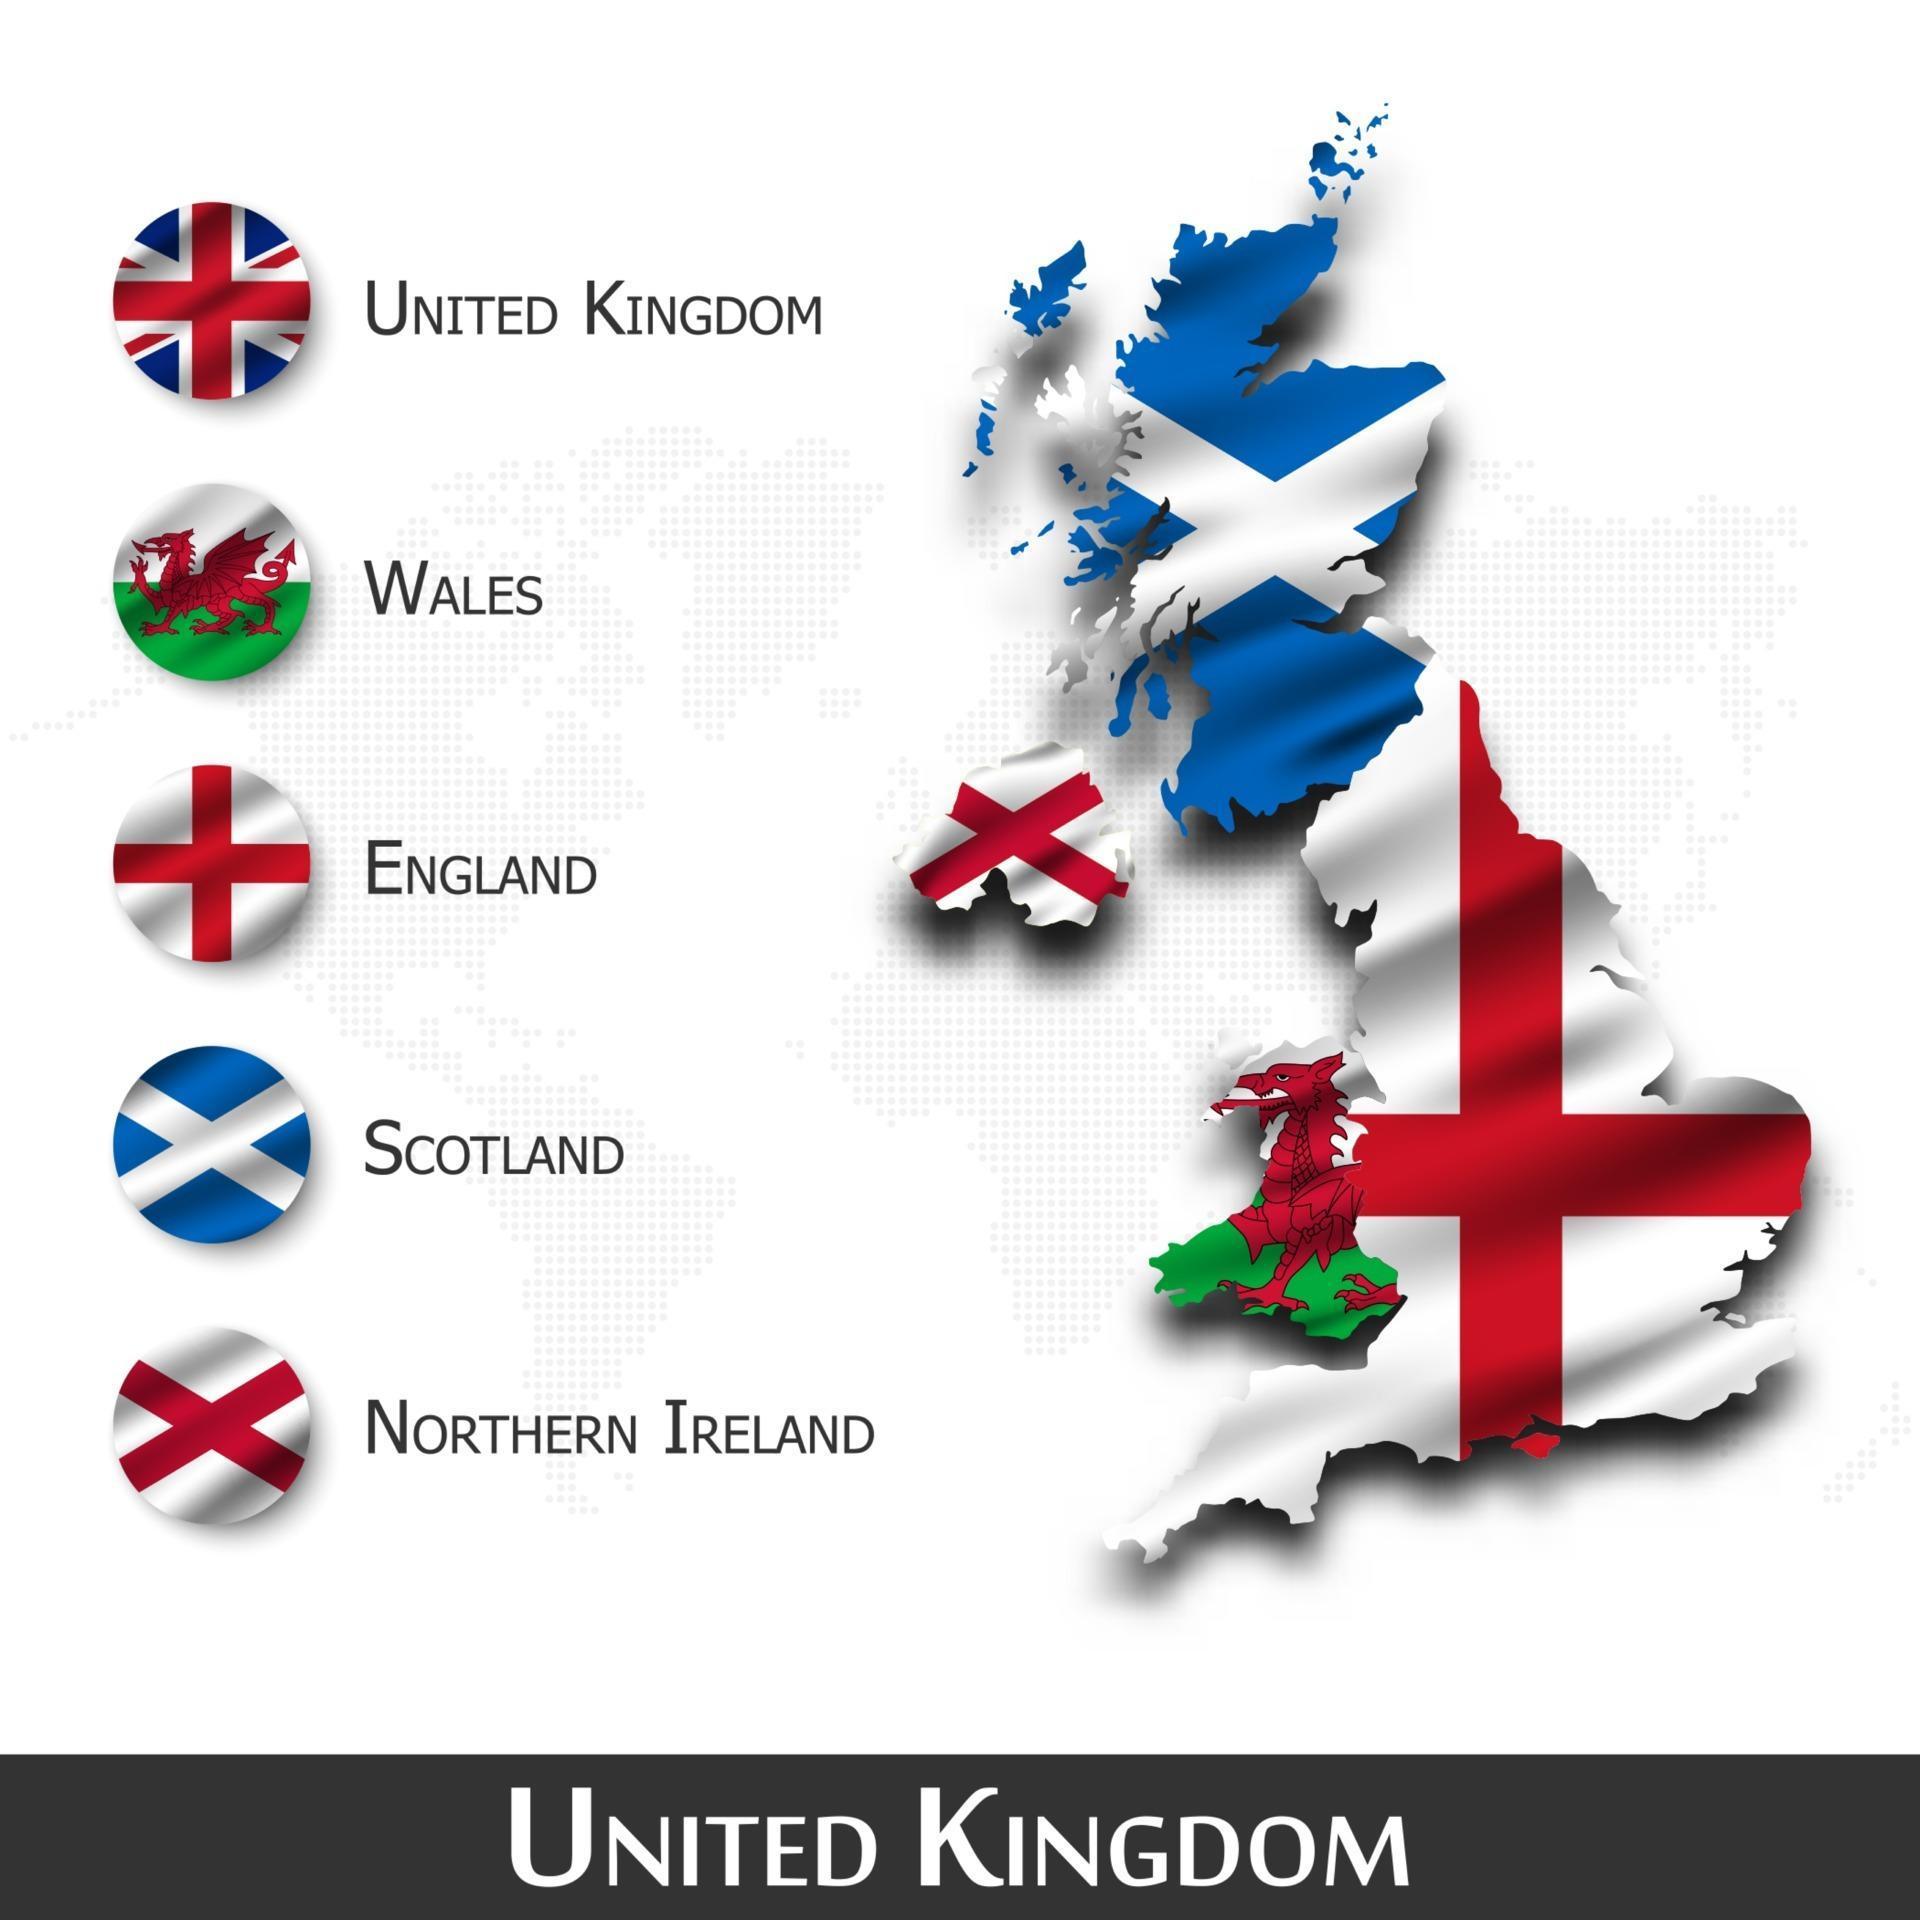 United Kingdom Of Great Britain Map And Flag Scotland Northern Ireland Wales England Waving Textile Design Dot World Map Background Vector 